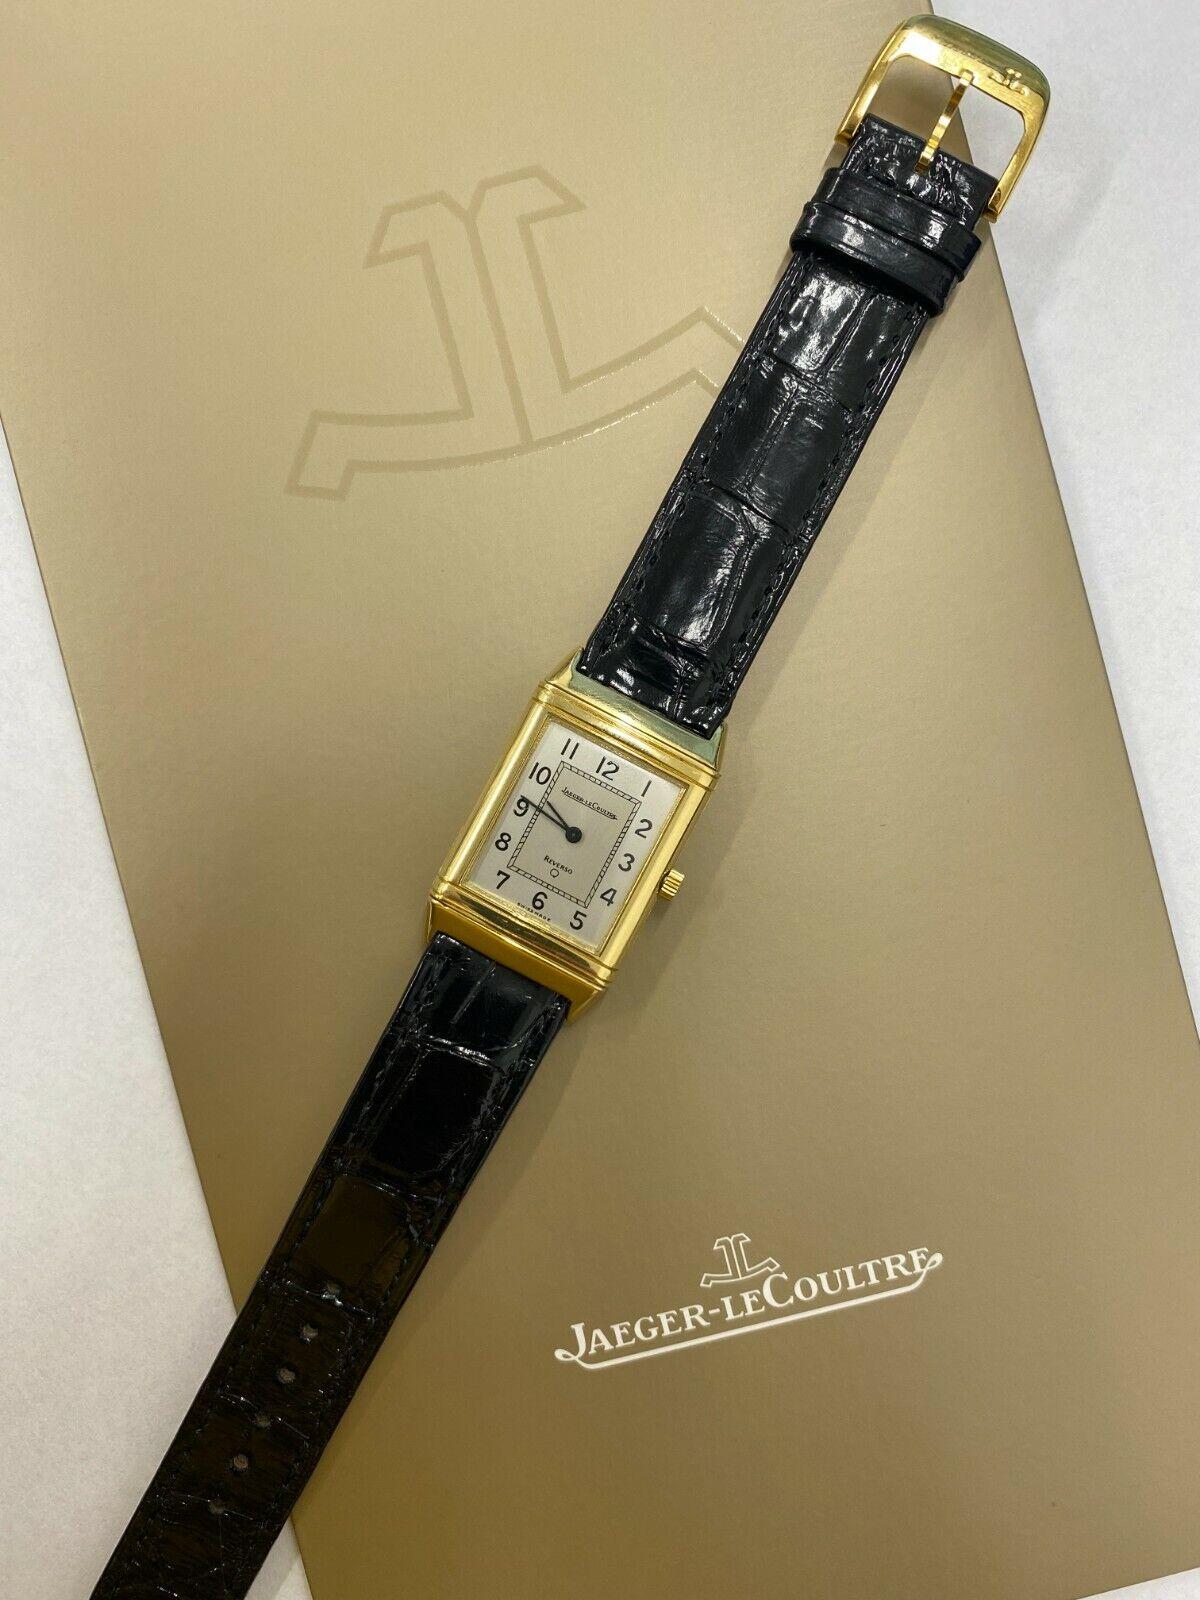 Unisex Jaeger-Le Coultre Reverso Classique Watch S18421, 18ct Yellow Gold

Additional Information:
With Original Box, But No Papers
Fully Serviced
Case size 38mm x 23mm
Case Material: 18ct yellow gold
Watch Shape: Rectangle
Lug Width: 17 mm
Strap